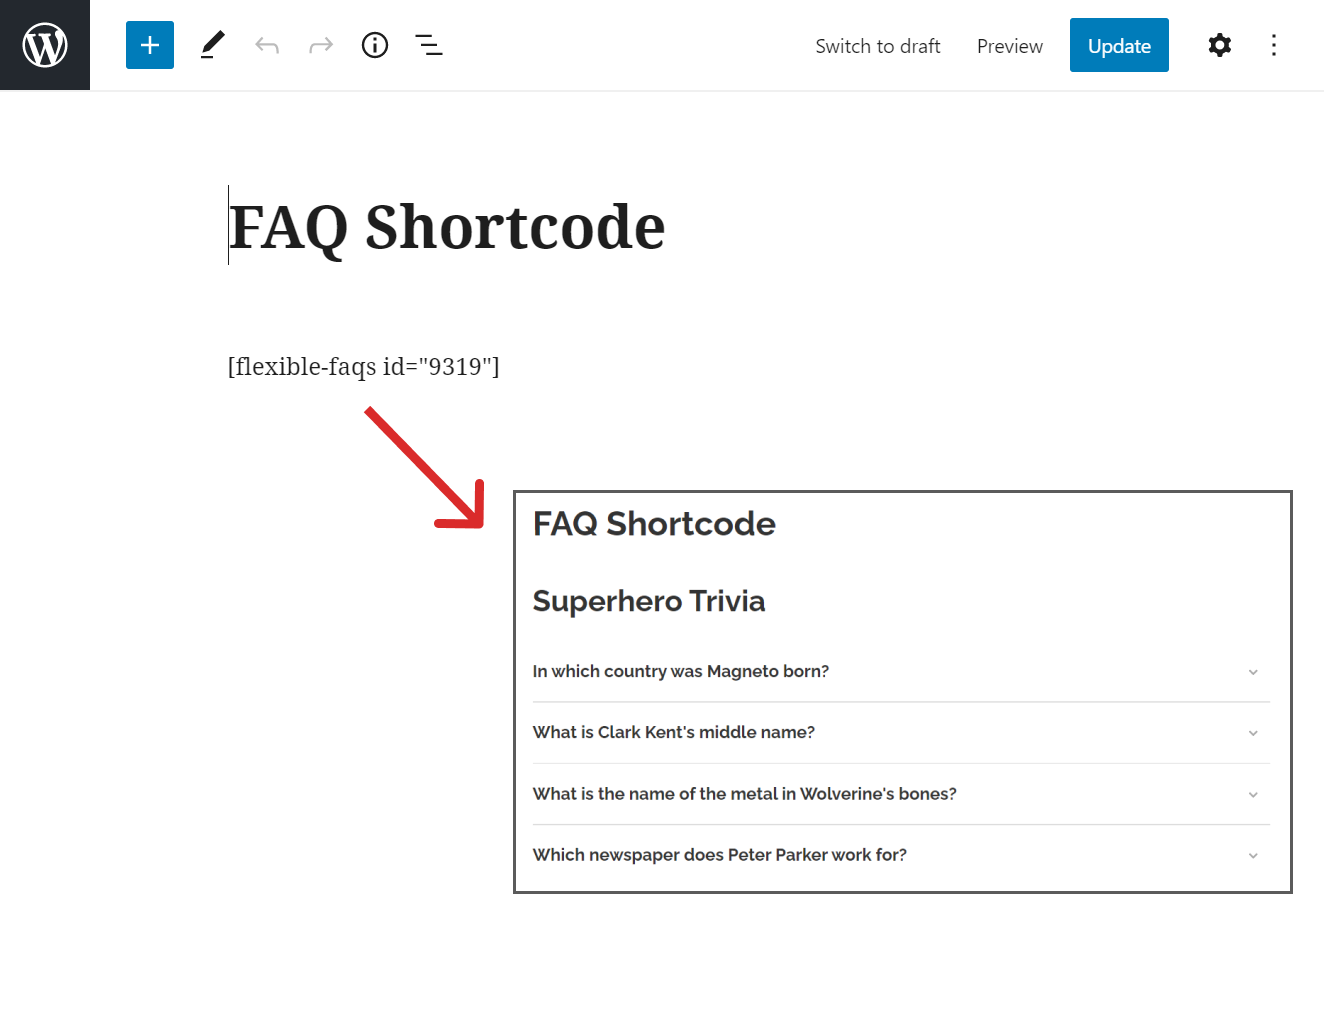 You can also display any FAQ via shortcodes too!